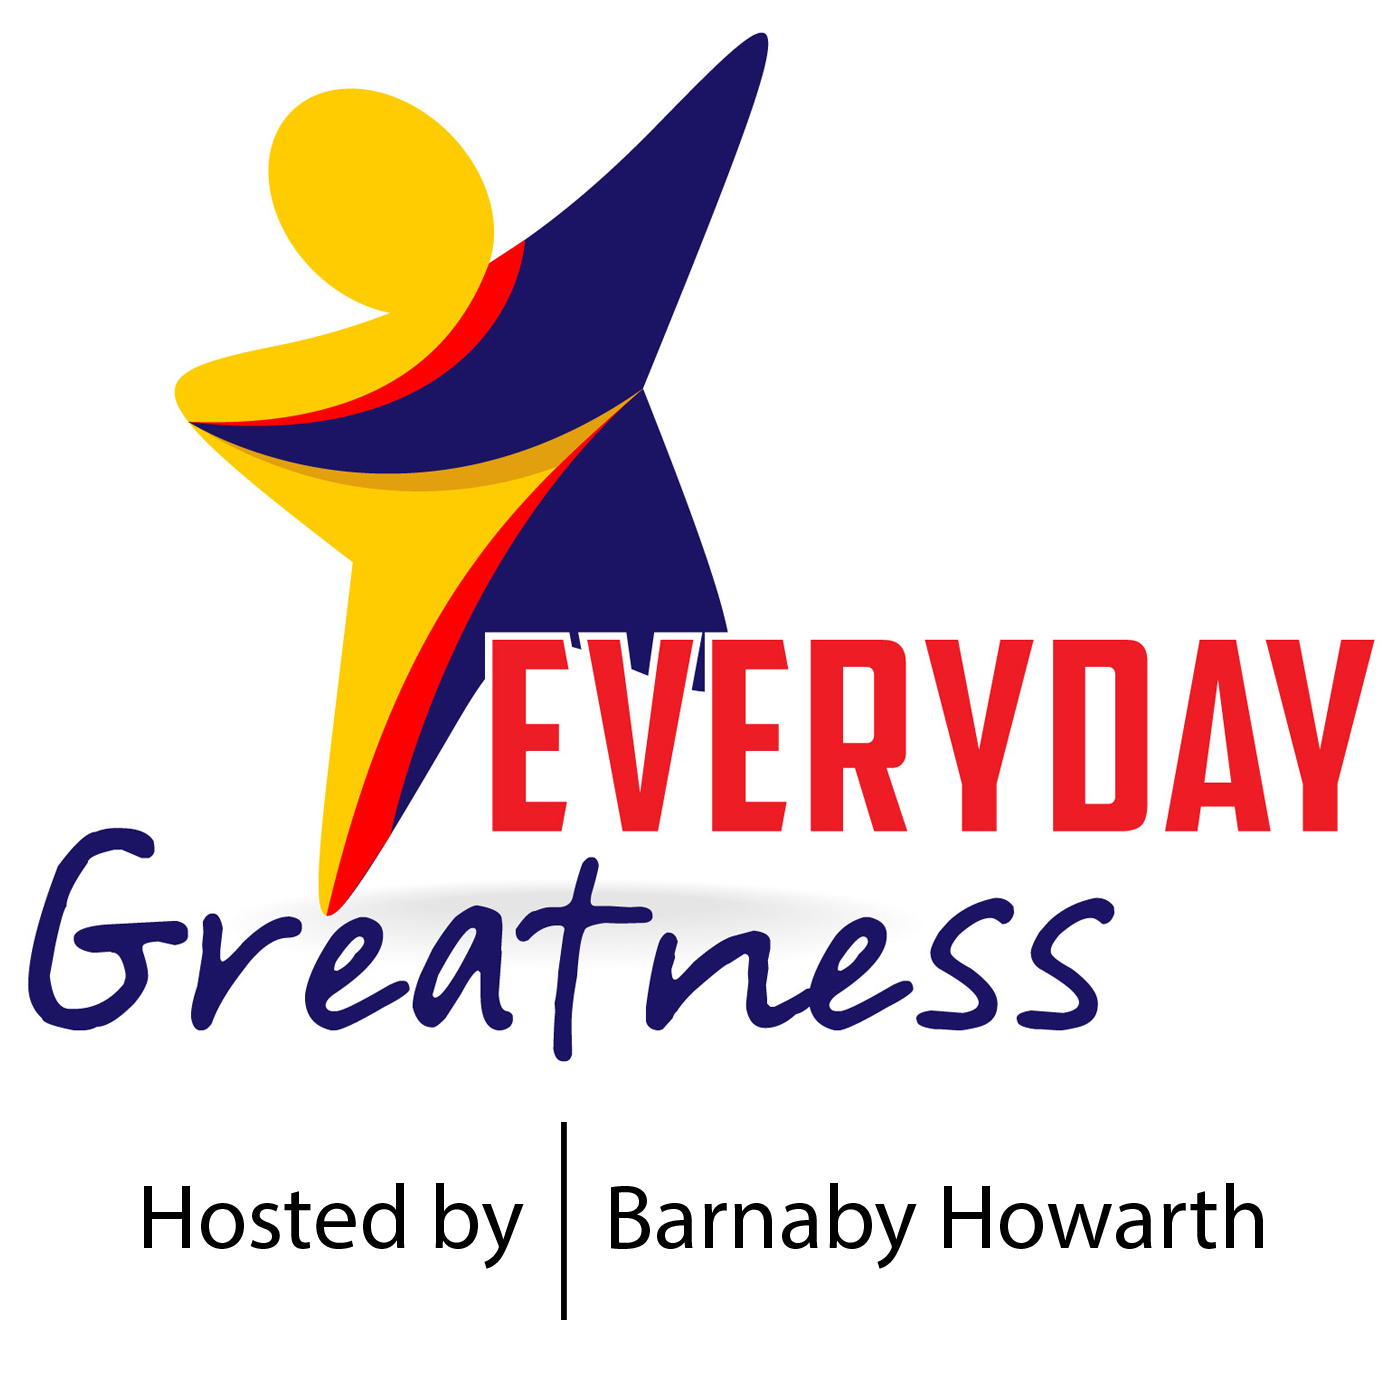 The Everyday Greatness Podcast hosted by Barnaby Howarth